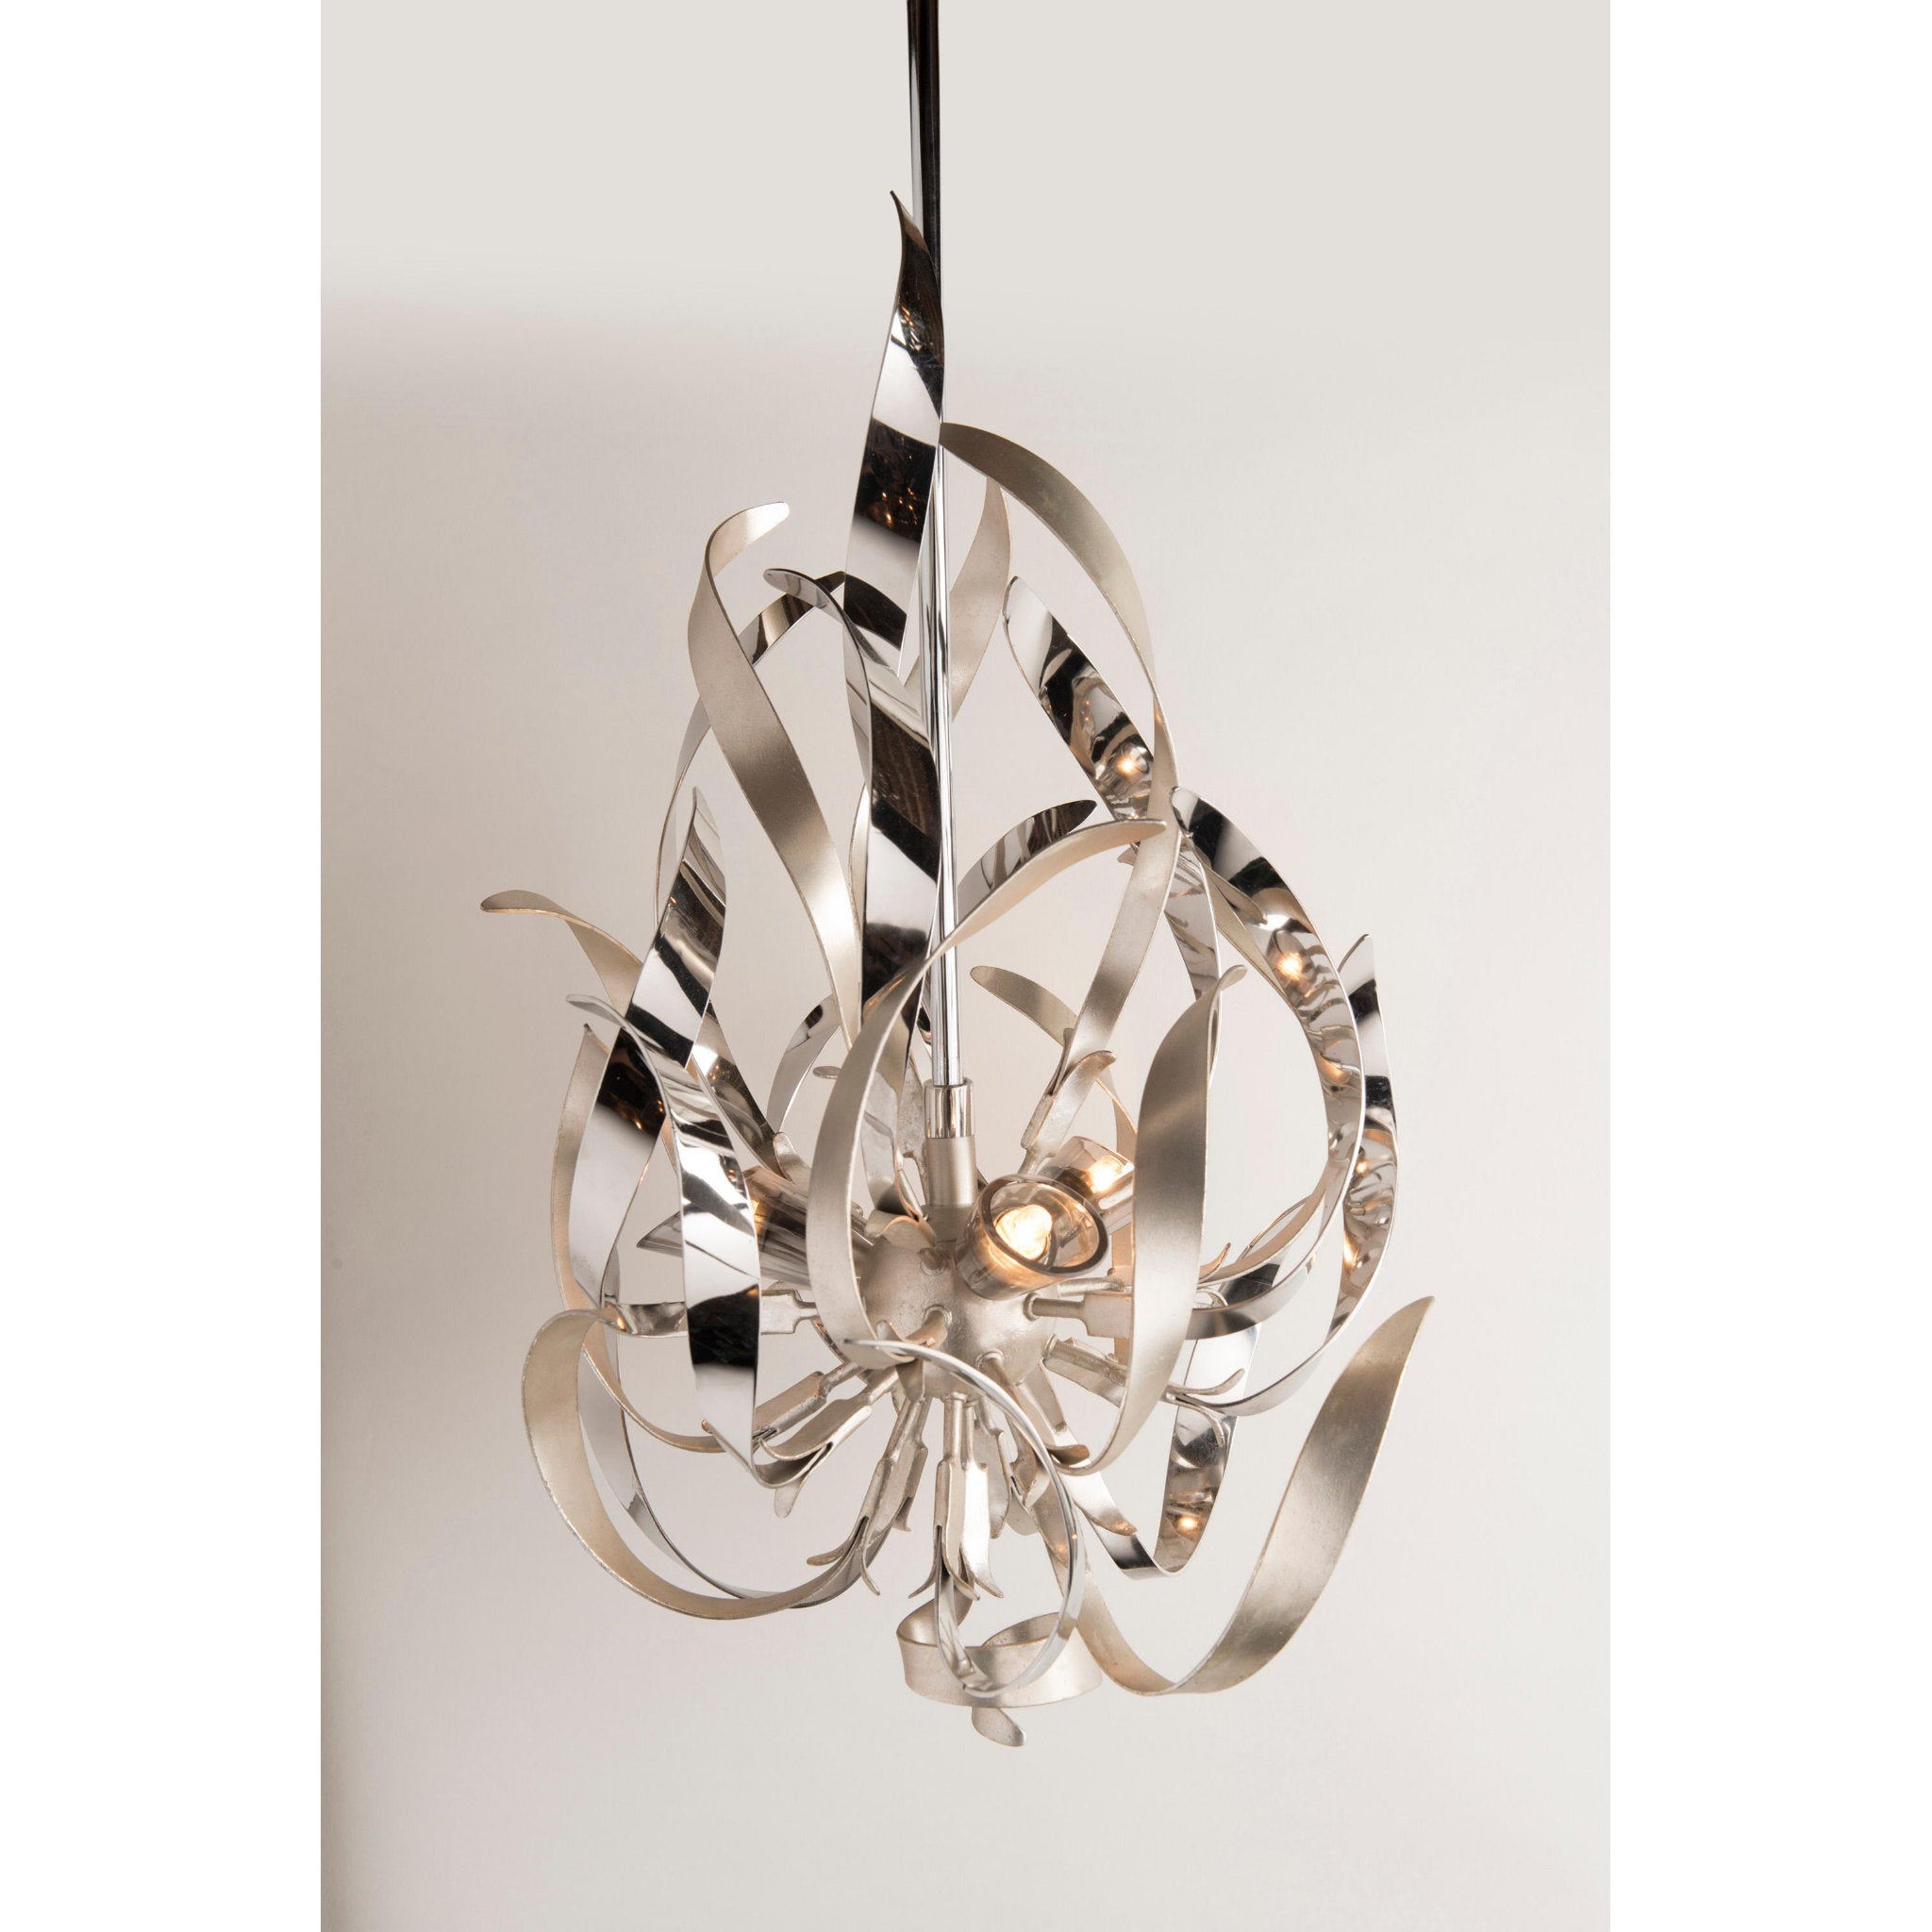 Graffiti 3 Light Pendant in Silver Leaf Polished Stainless